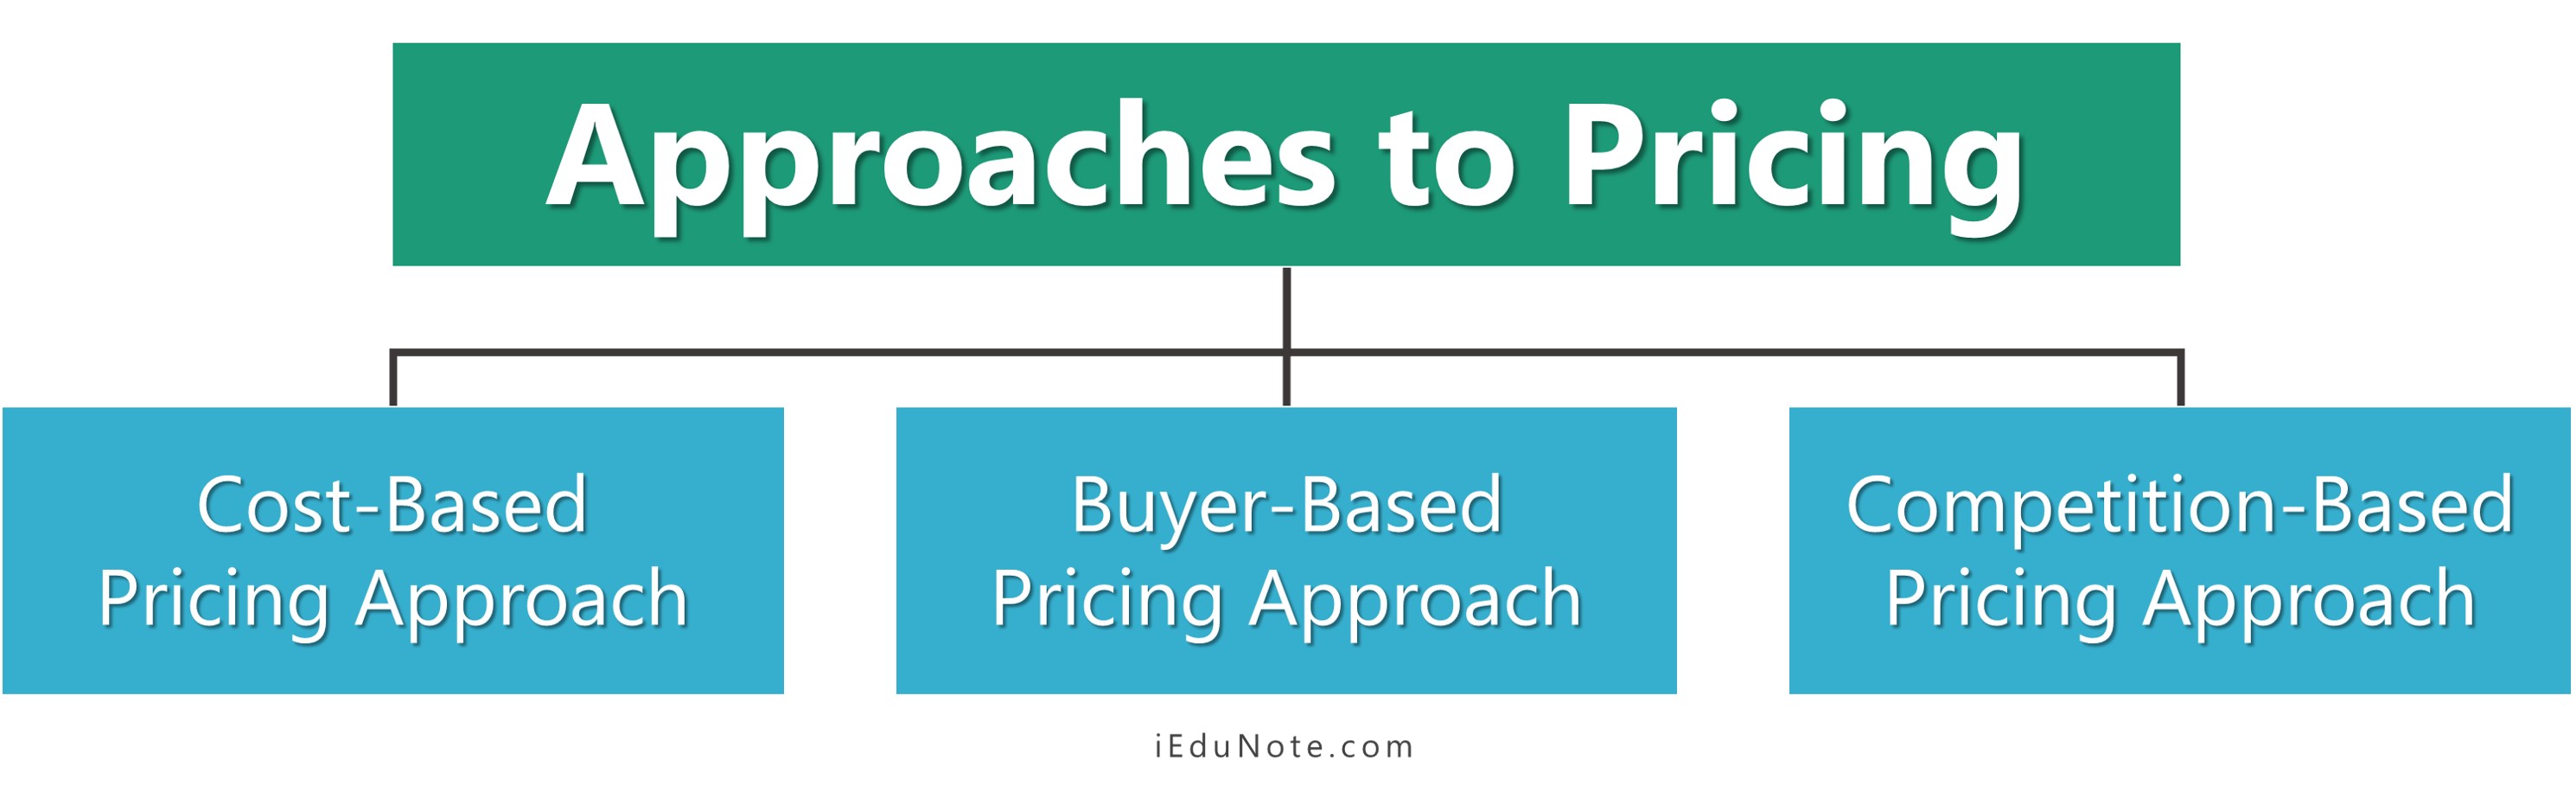 Principles of pricing. Product pricing in International Business pics. Pricing method